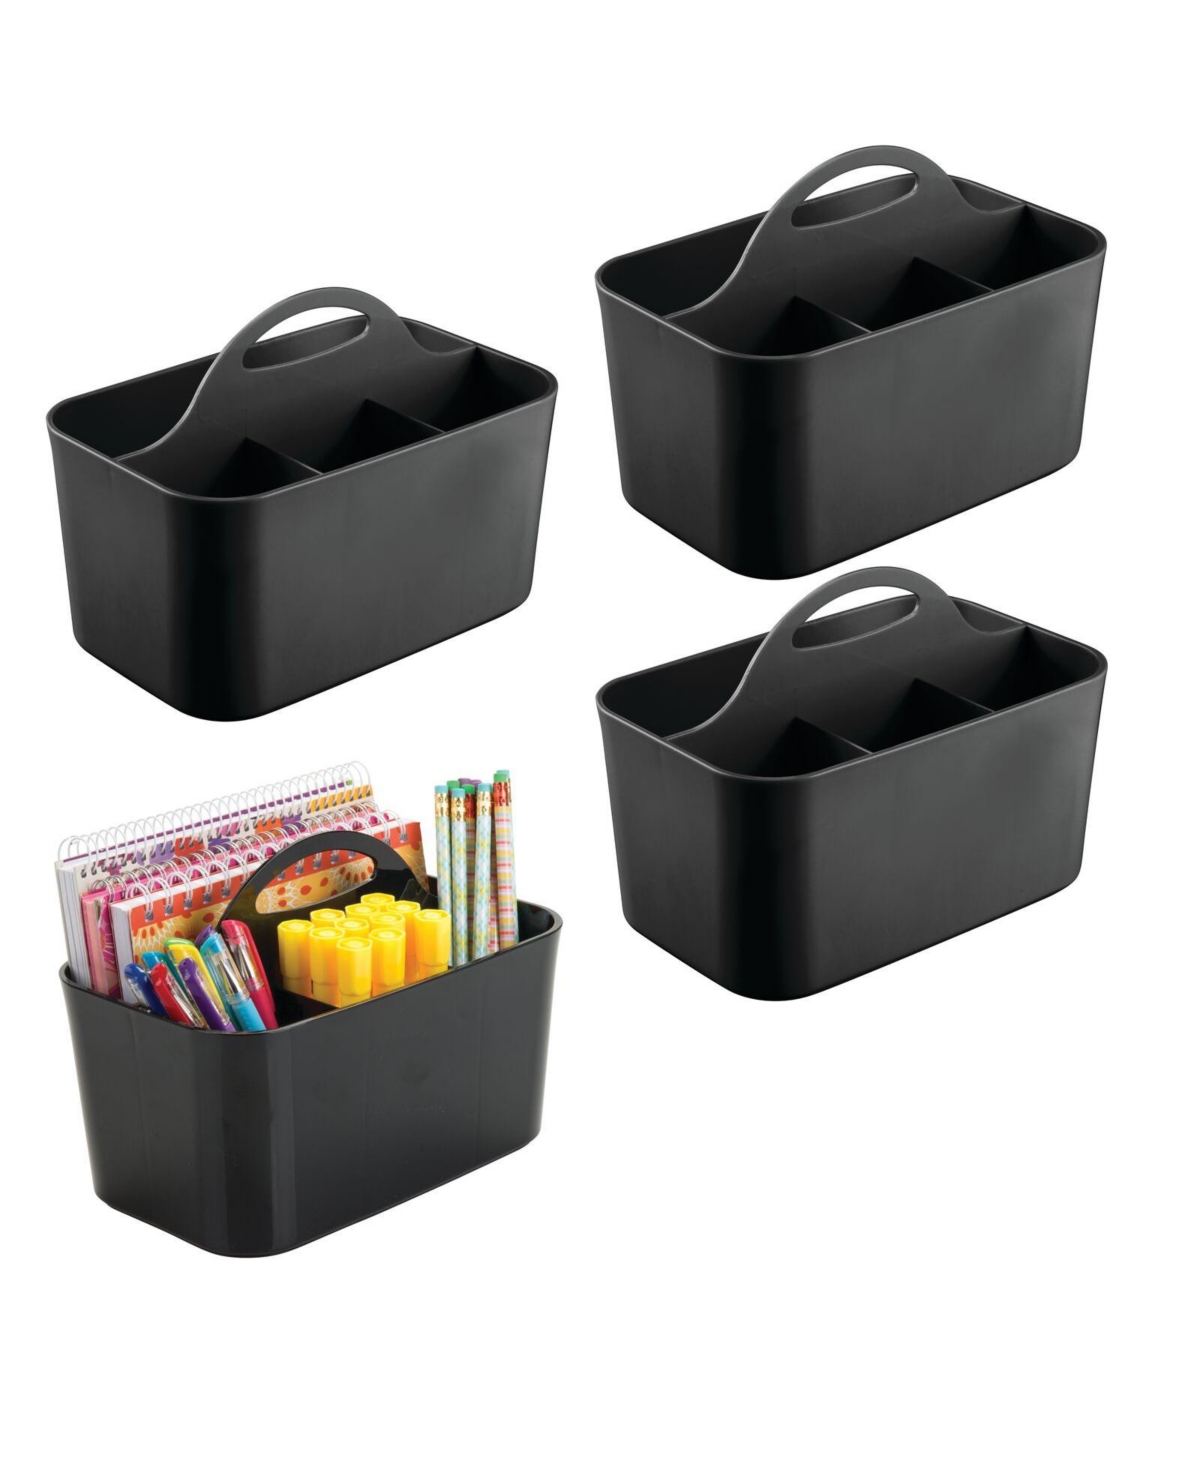 Small Plastic Caddy Tote for Desktop Office Supplies, 4 Pack, Black - Black